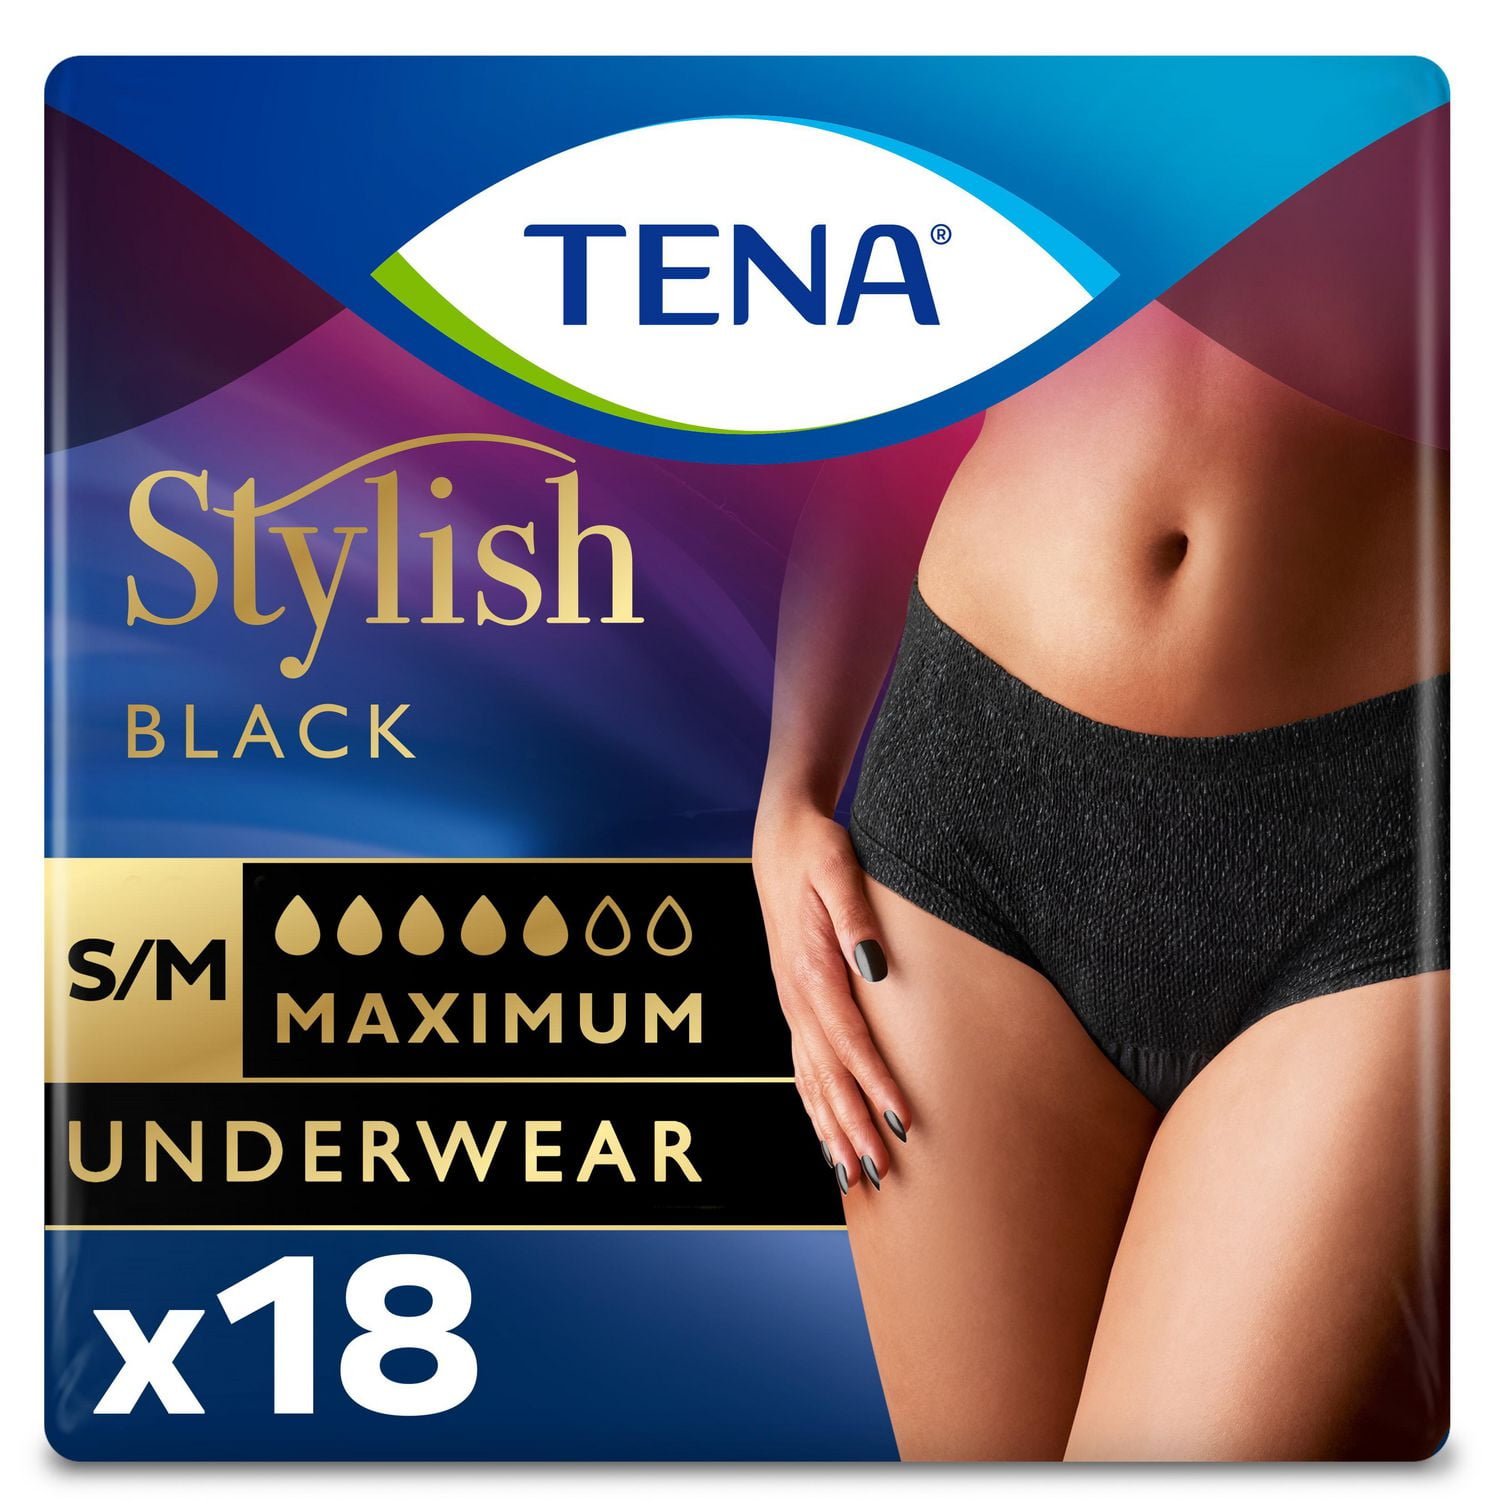 Tena Female Adult Absorbent Underwear, Count of 20 (Pack of 4